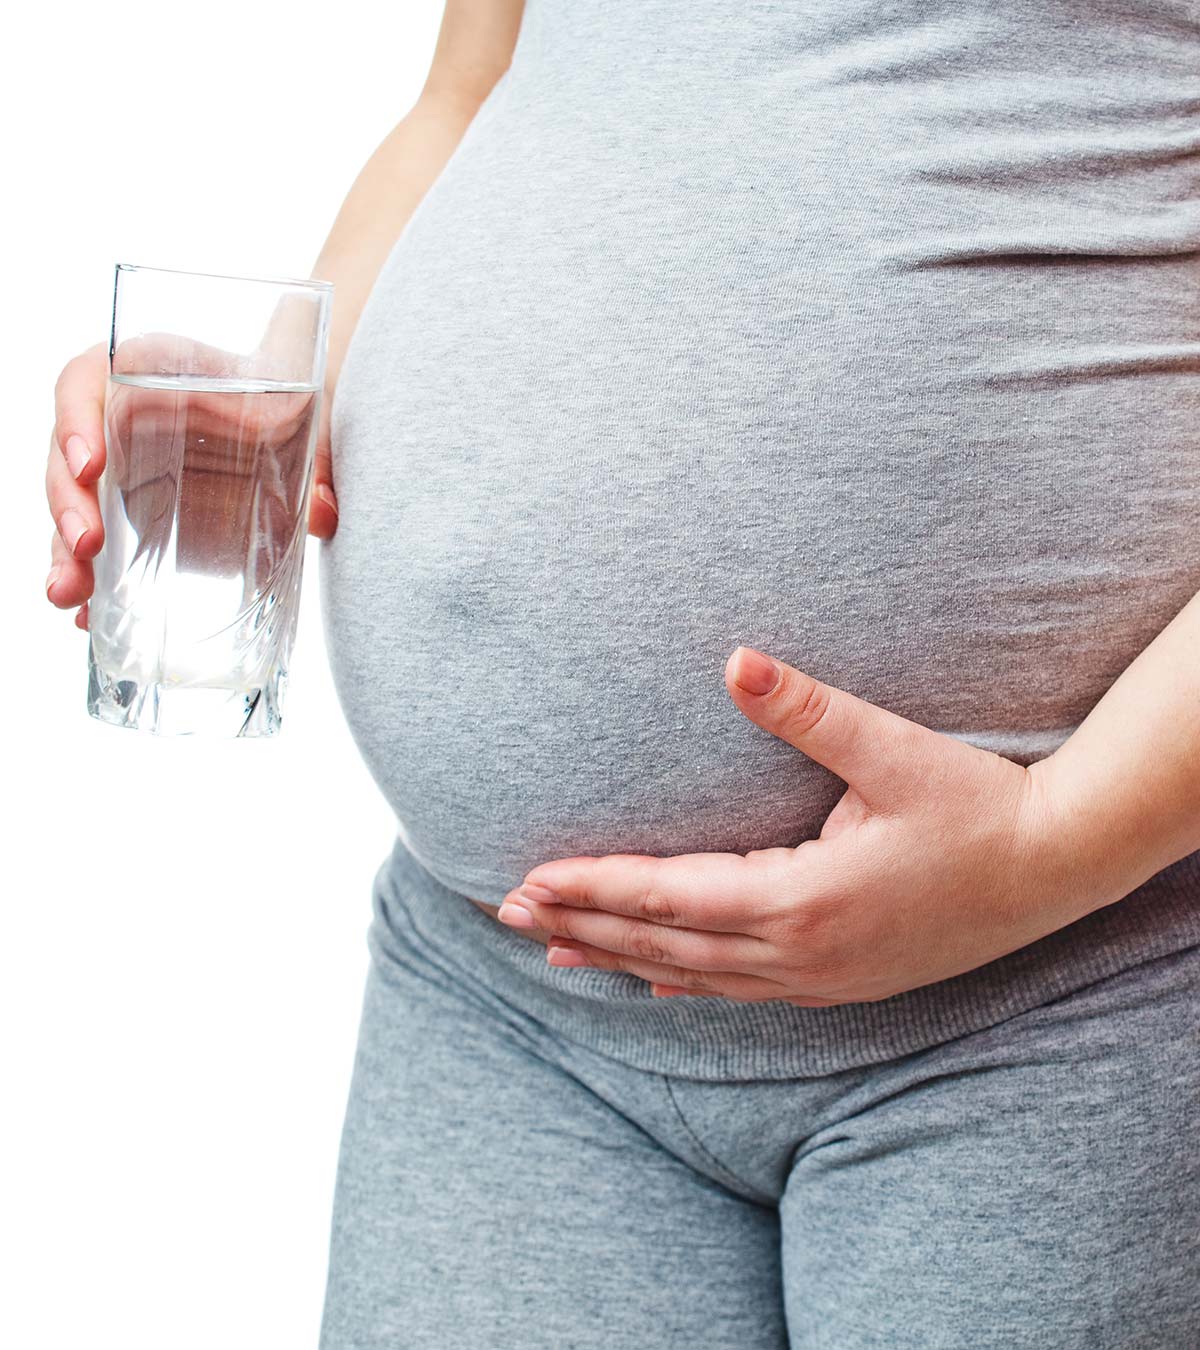 Is It Safe To Drink Hot Water During Pregnancy?